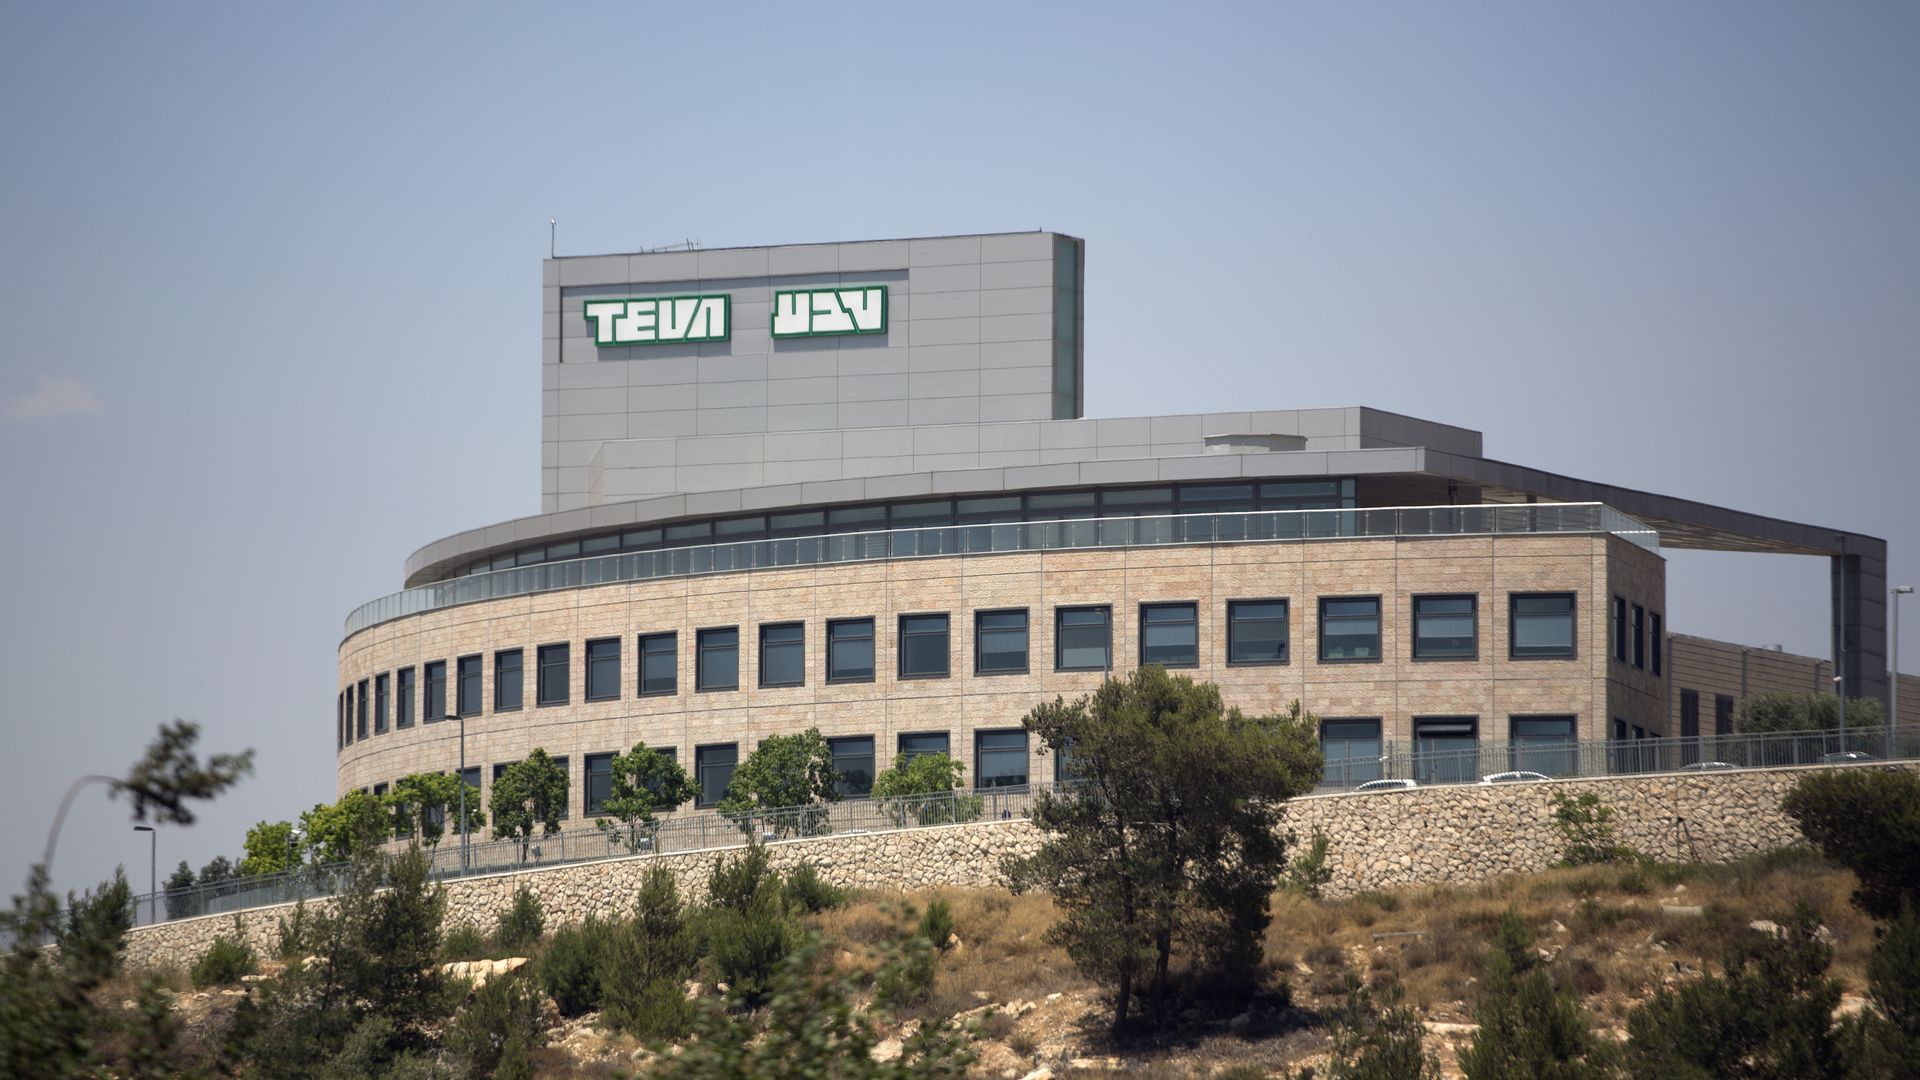 A drug manufacturing plant with the Teva logo on top.